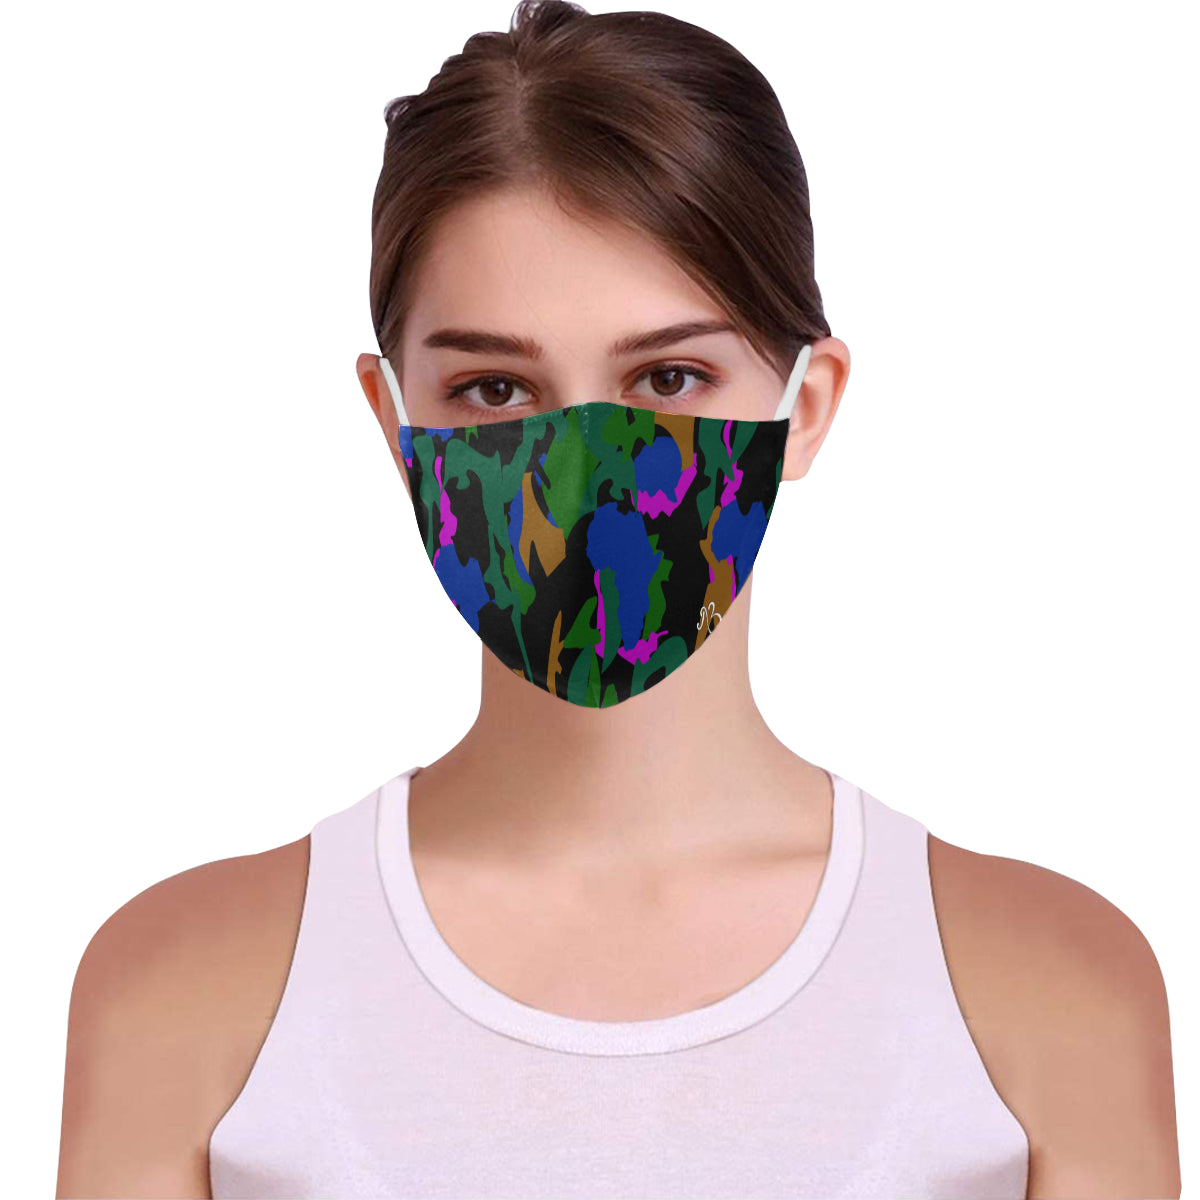 AfriBix Camo Print Cotton Fabric Face Mask with Filter Slot & Adjustable Strap - Non-medical use (2 Filters Included)